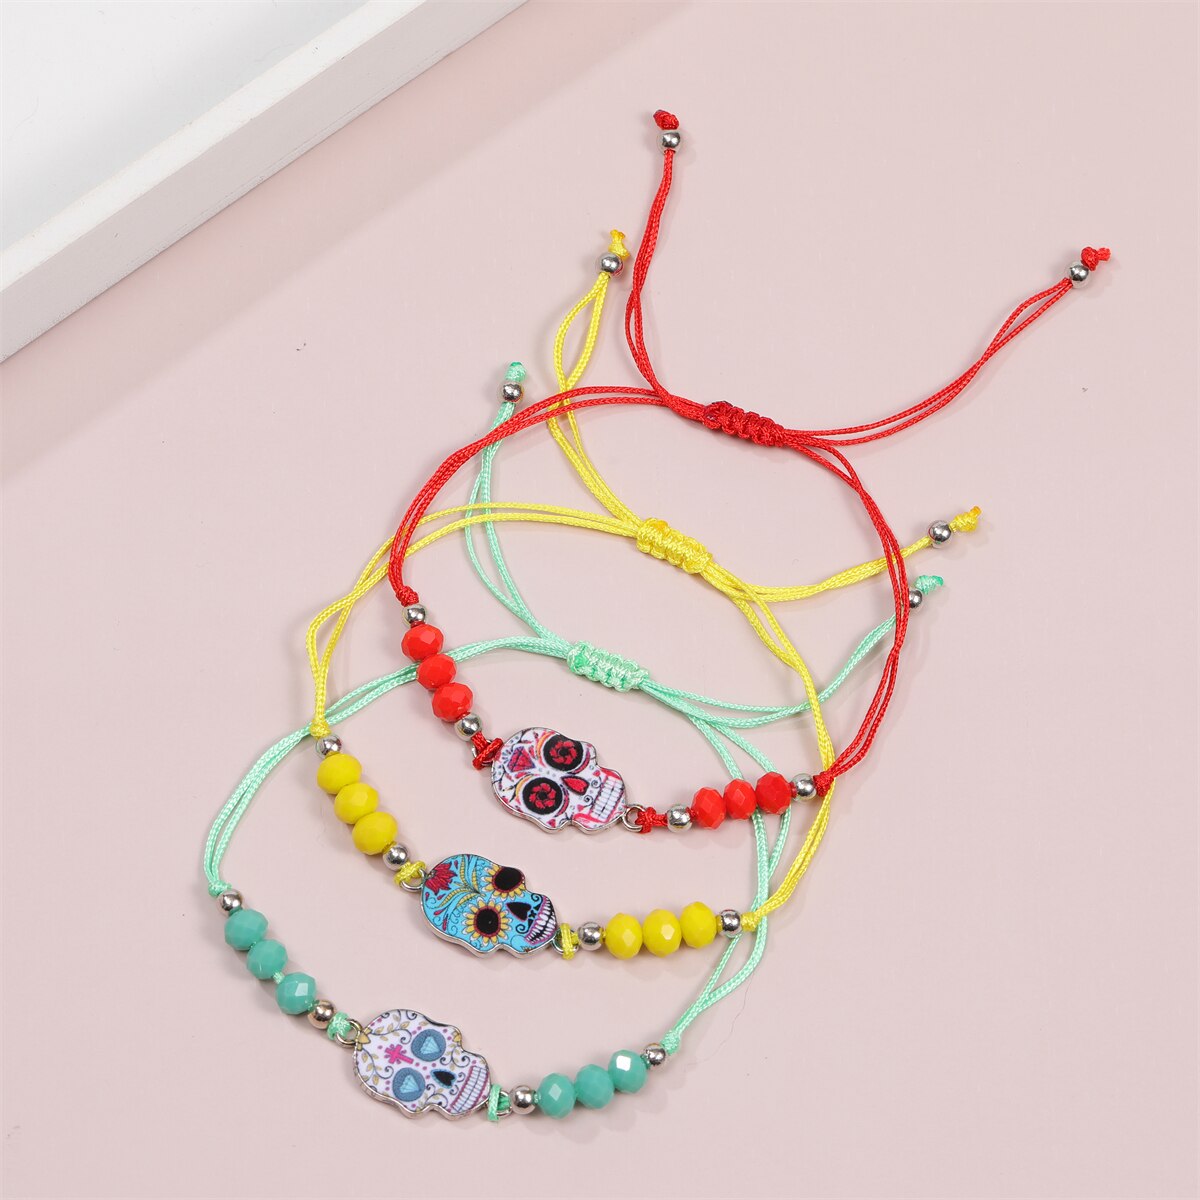 Enamel Skull Charms Elastic Bracelet for Women Adjustable Braided Rope Chain Rubber Band Wristband Jewelry Gift